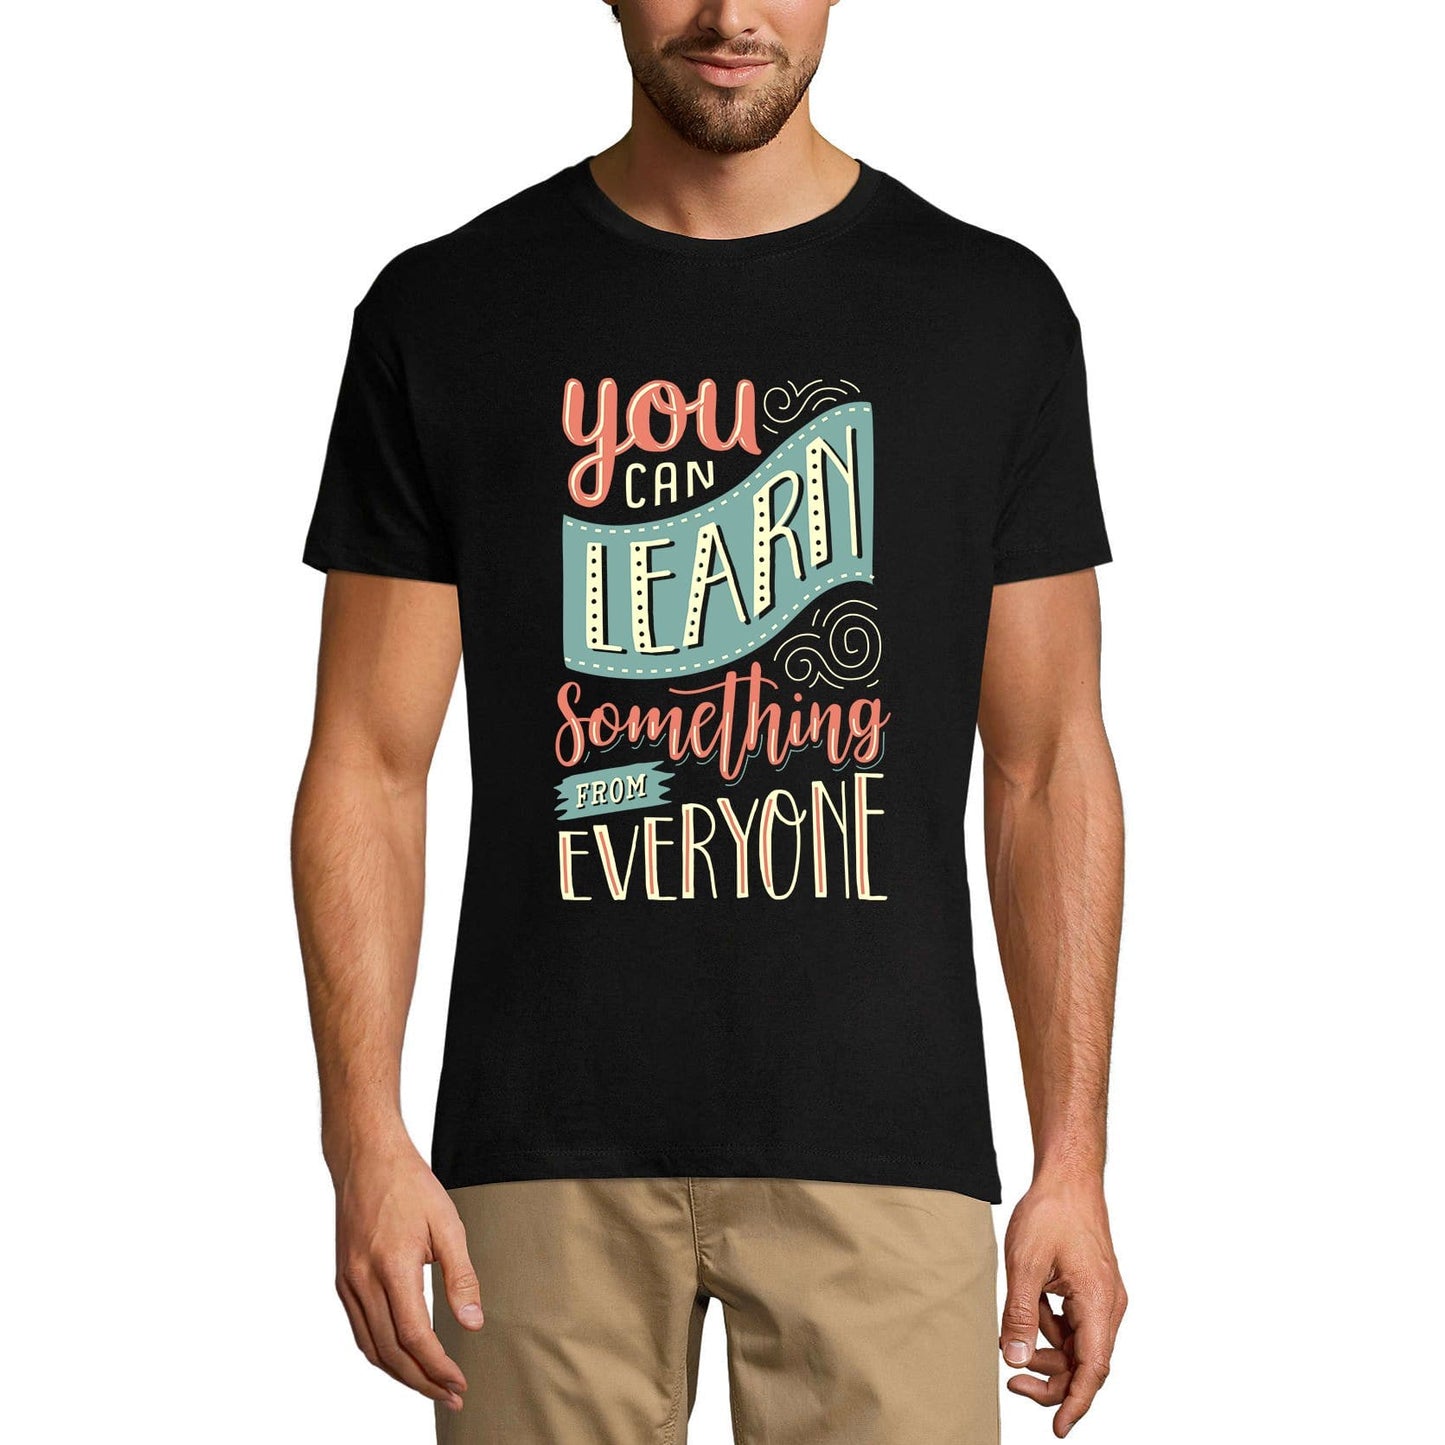 ULTRABASIC Men's T-Shirt You Can Learn Something From Everyone - Short Sleeve Tee shirt